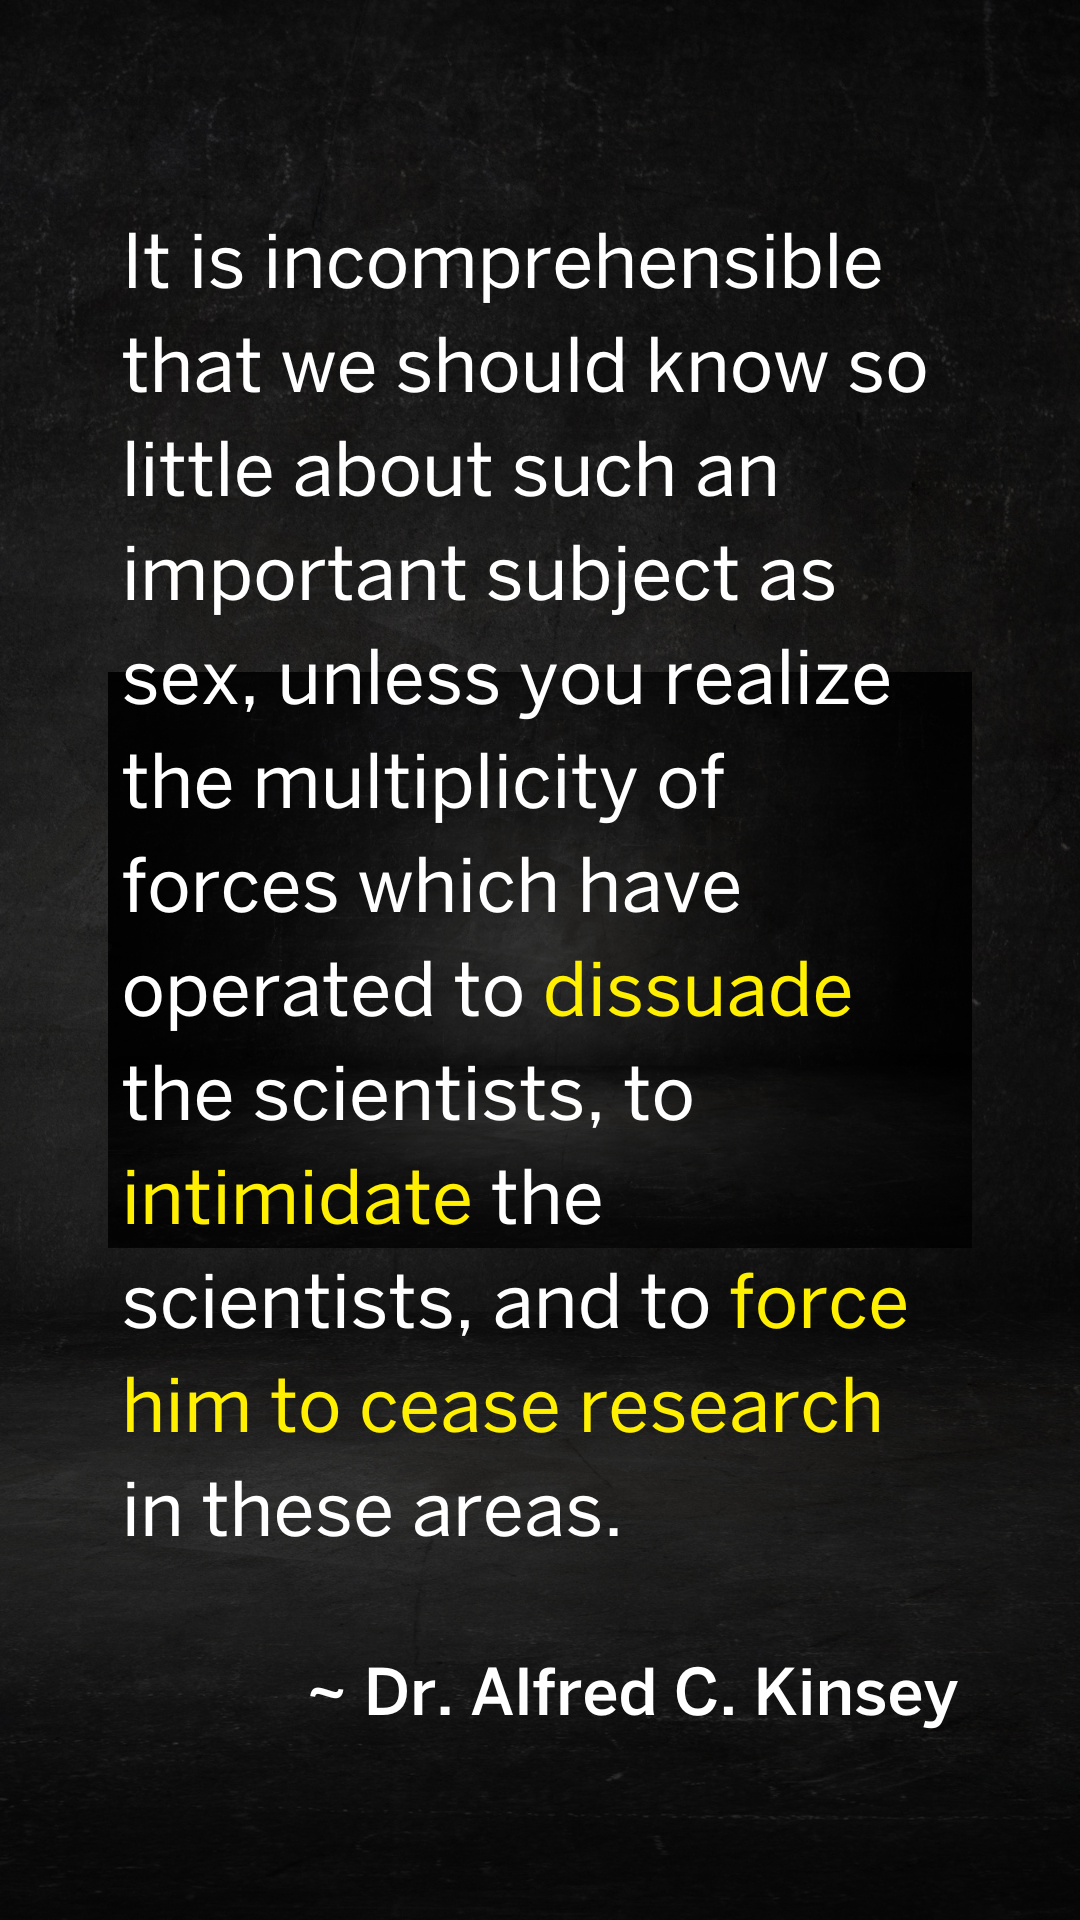 Dr. Kinsey quote. "It is incomprehensible that we should know so little about such an important subject as sex, unless you realize the multiplicity of forces which have operated to dissuade the scientist, to intimidate the scientist, and to force him to cease research in these areas."